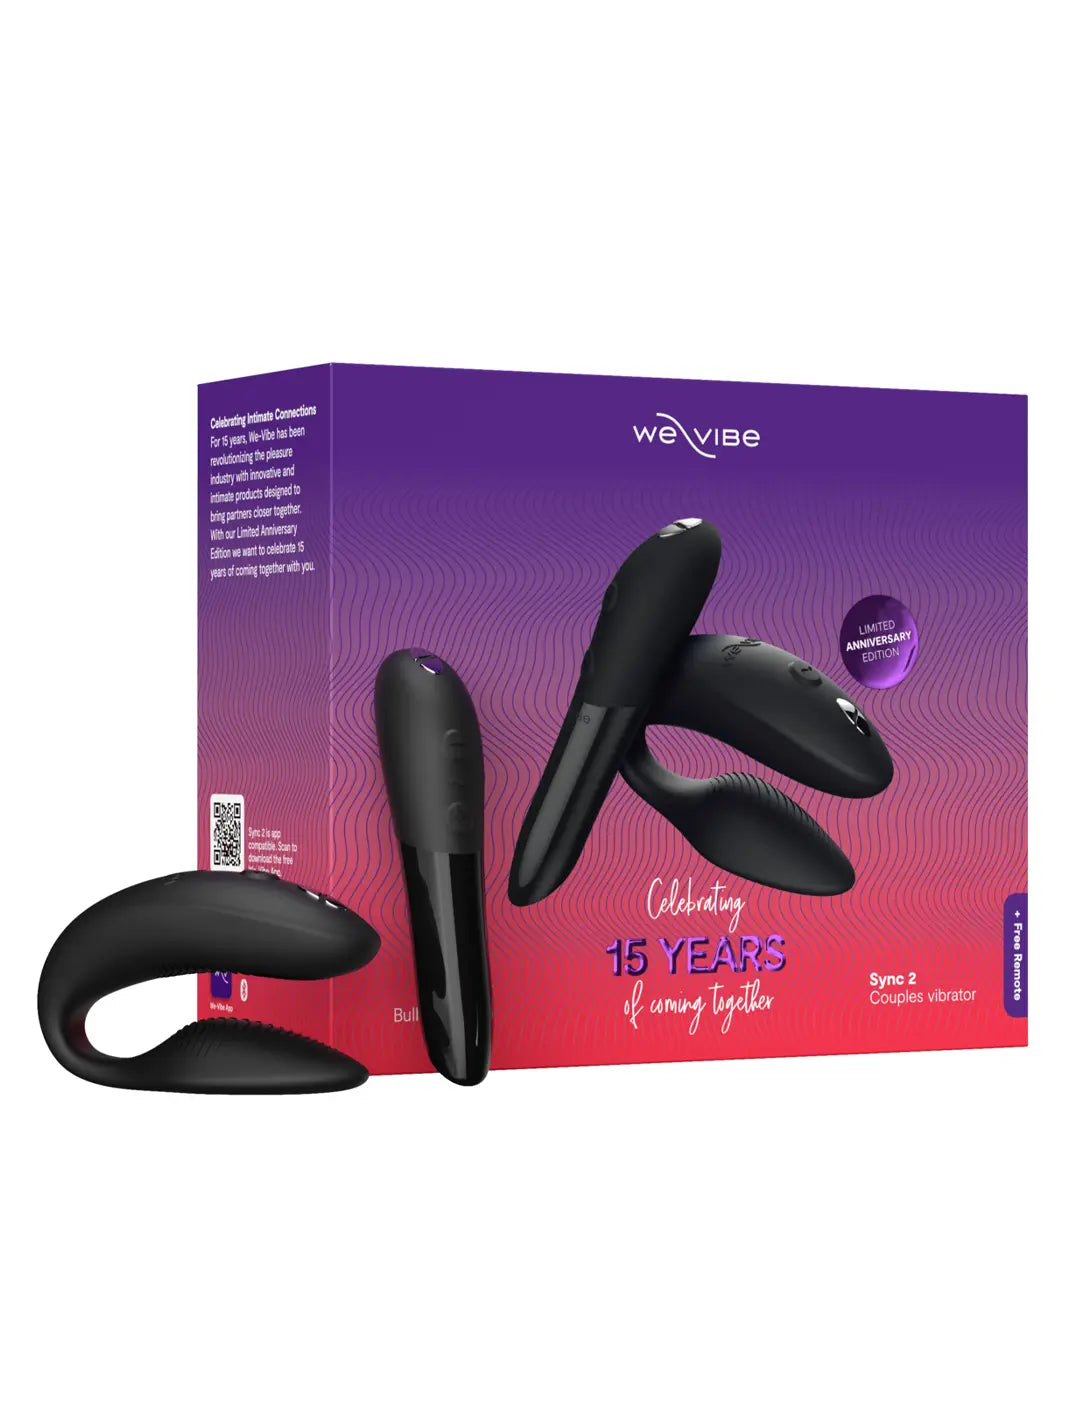 We-Vibe 15 Year Anniversary Collection - joujou.com.au